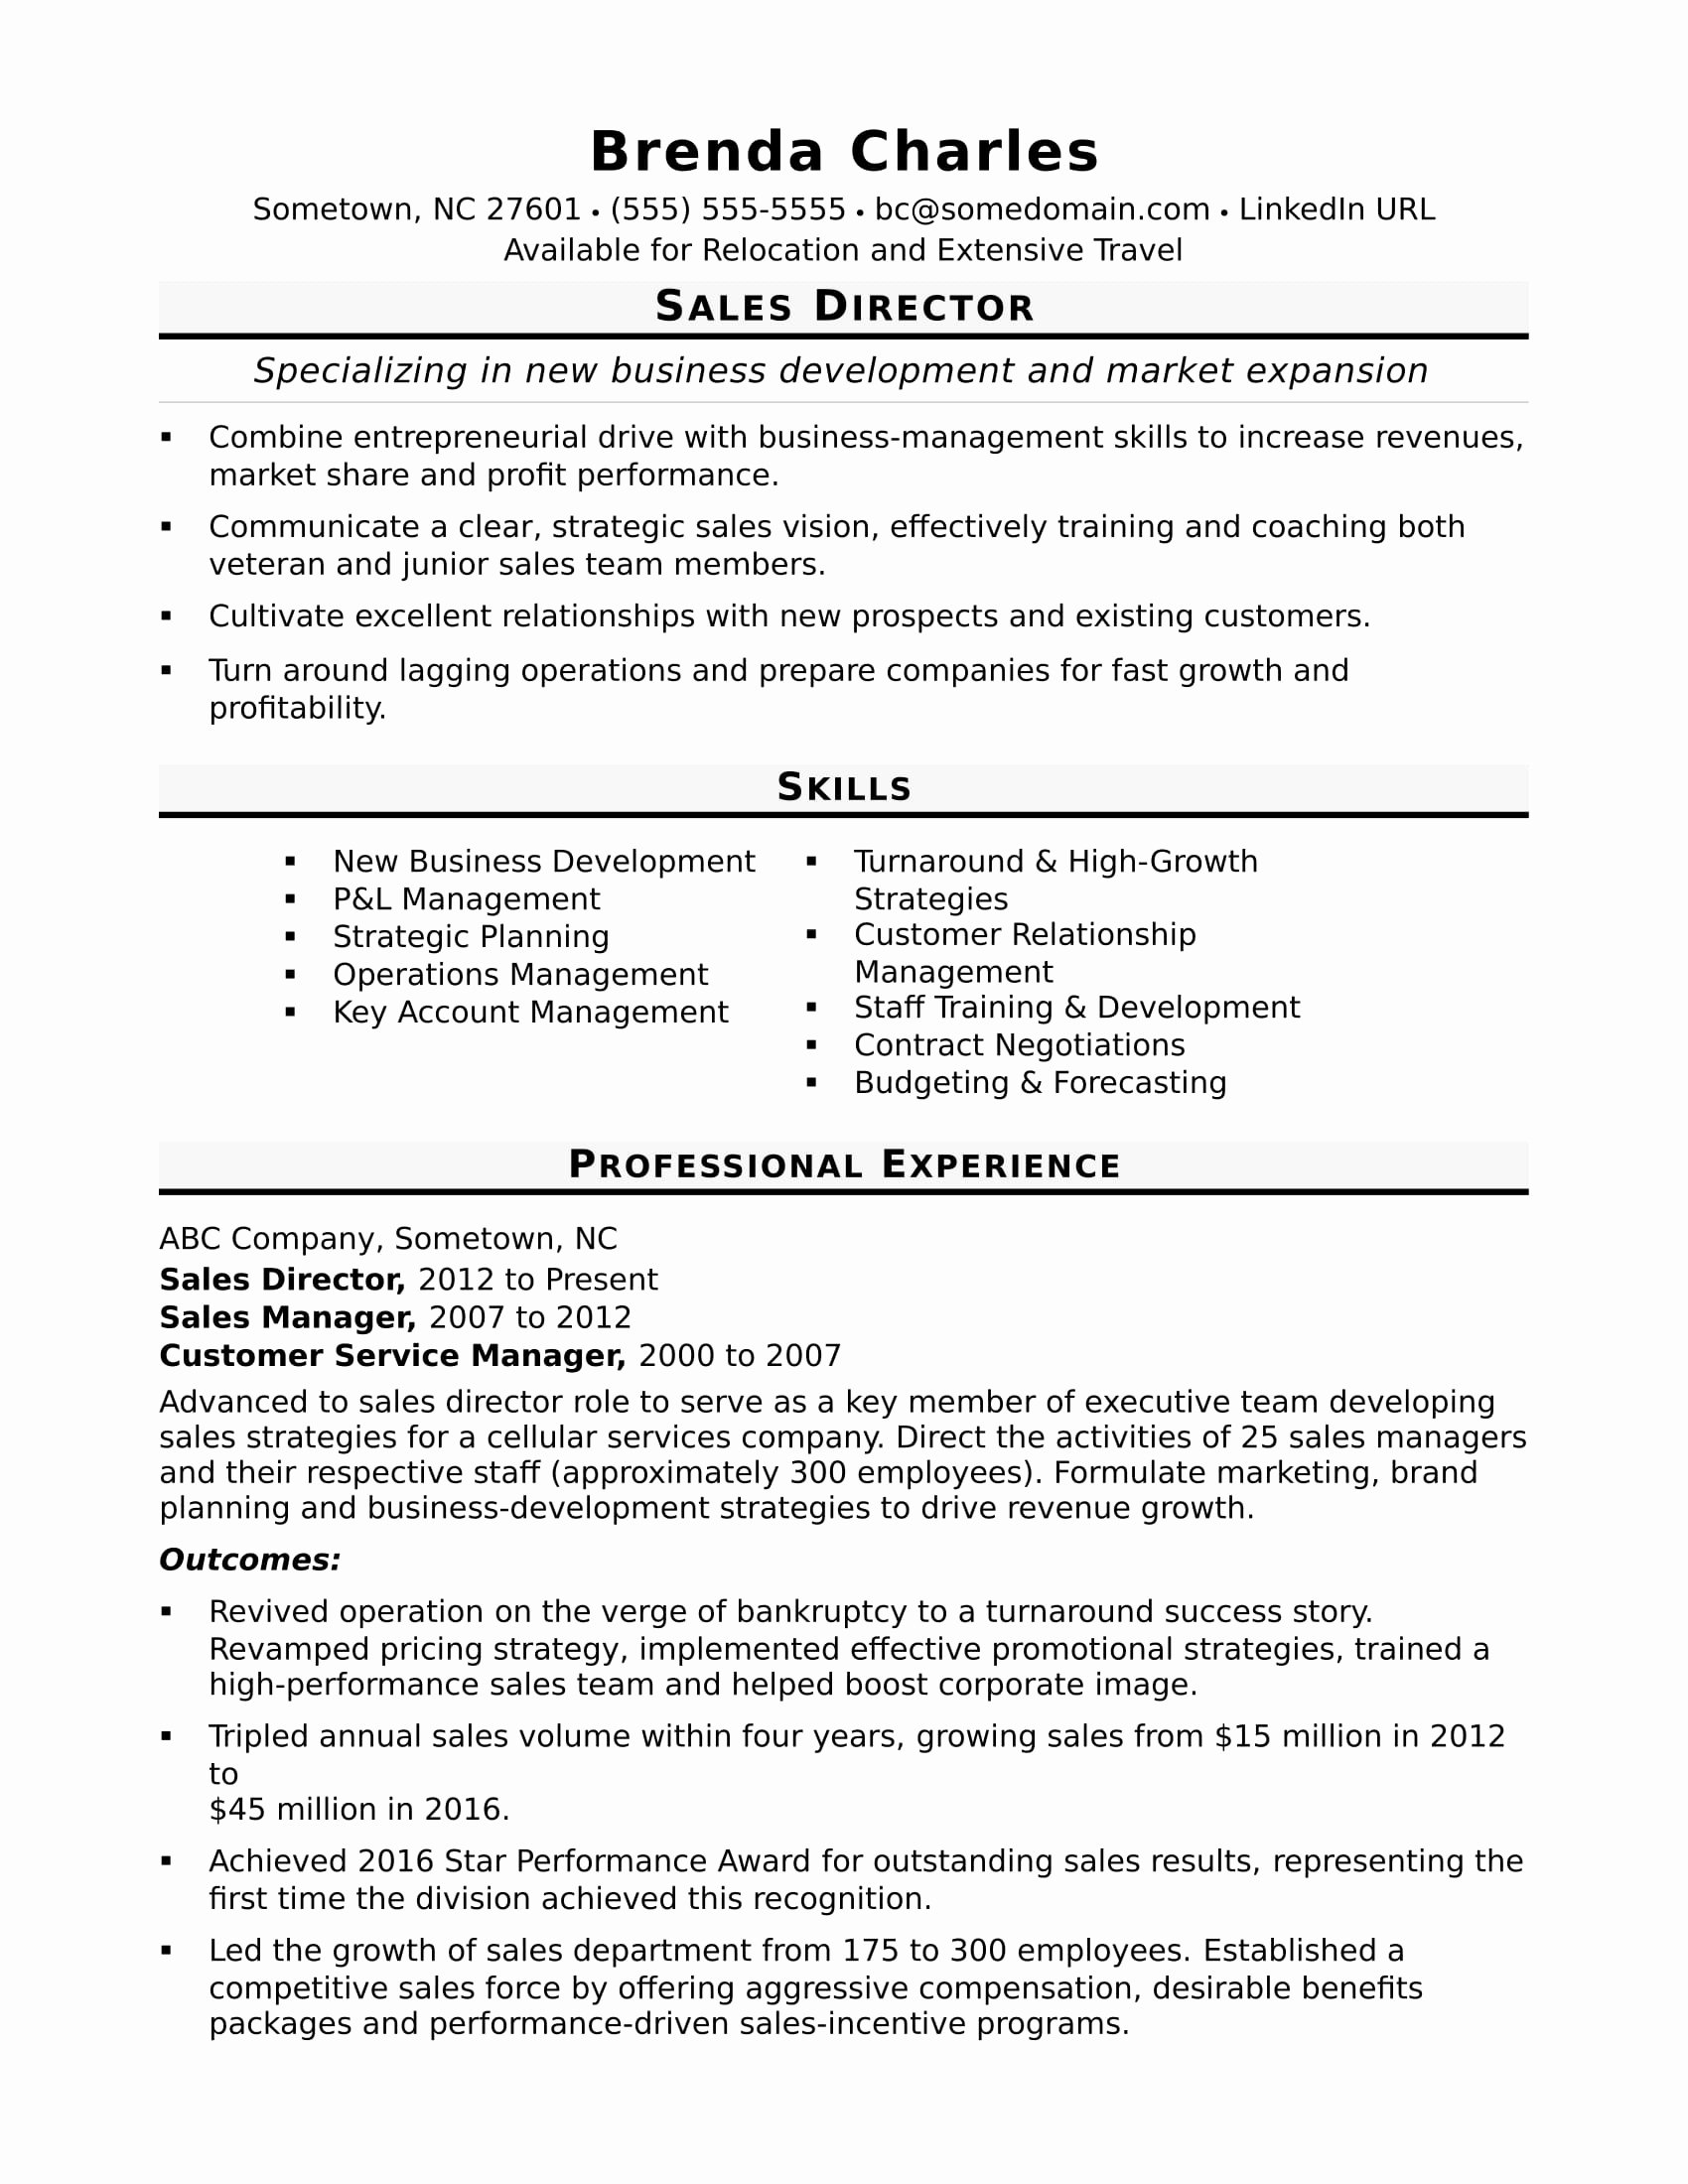 Resume for Promotion within Same Company Lovely Sample Resume Promotion within Pany